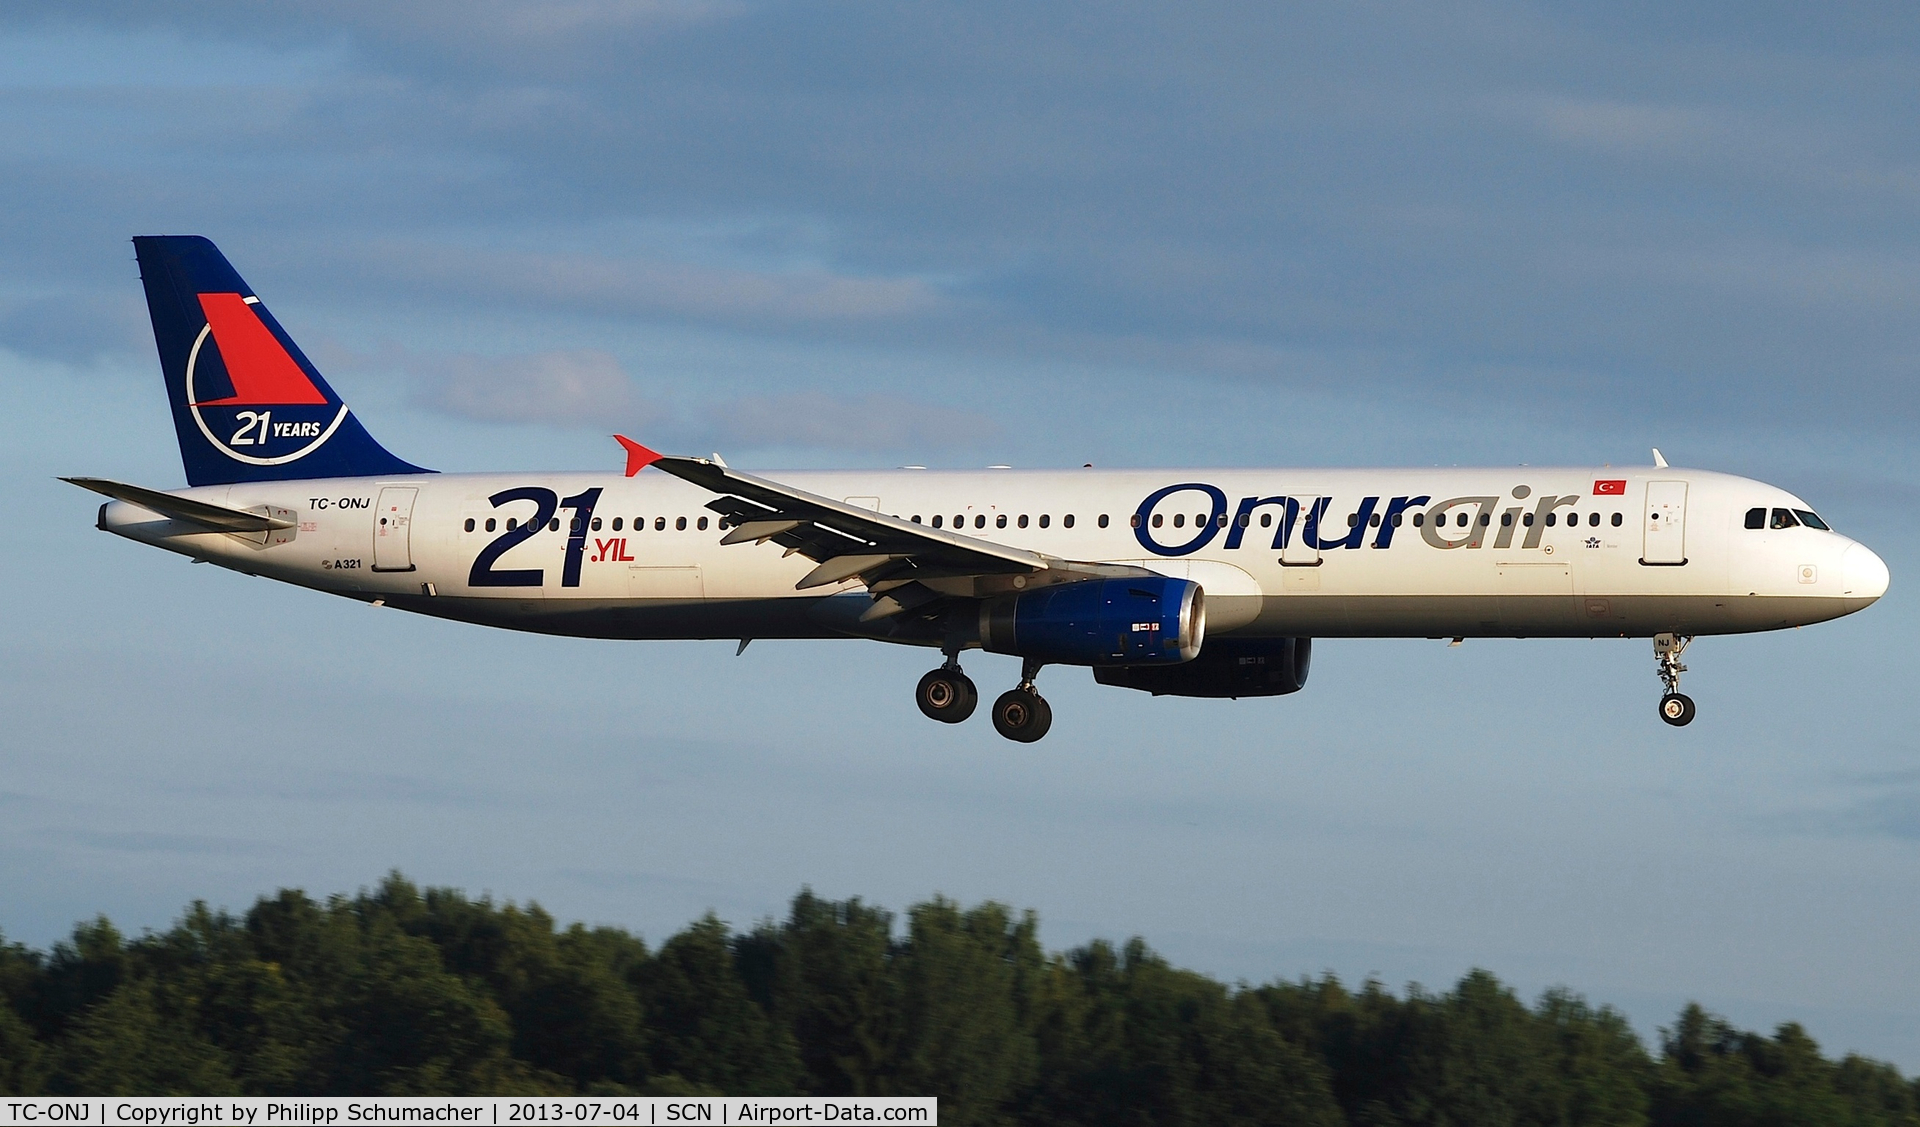 TC-ONJ, 1993 Airbus A321-131 C/N 385, flying for SunExpress this evening !